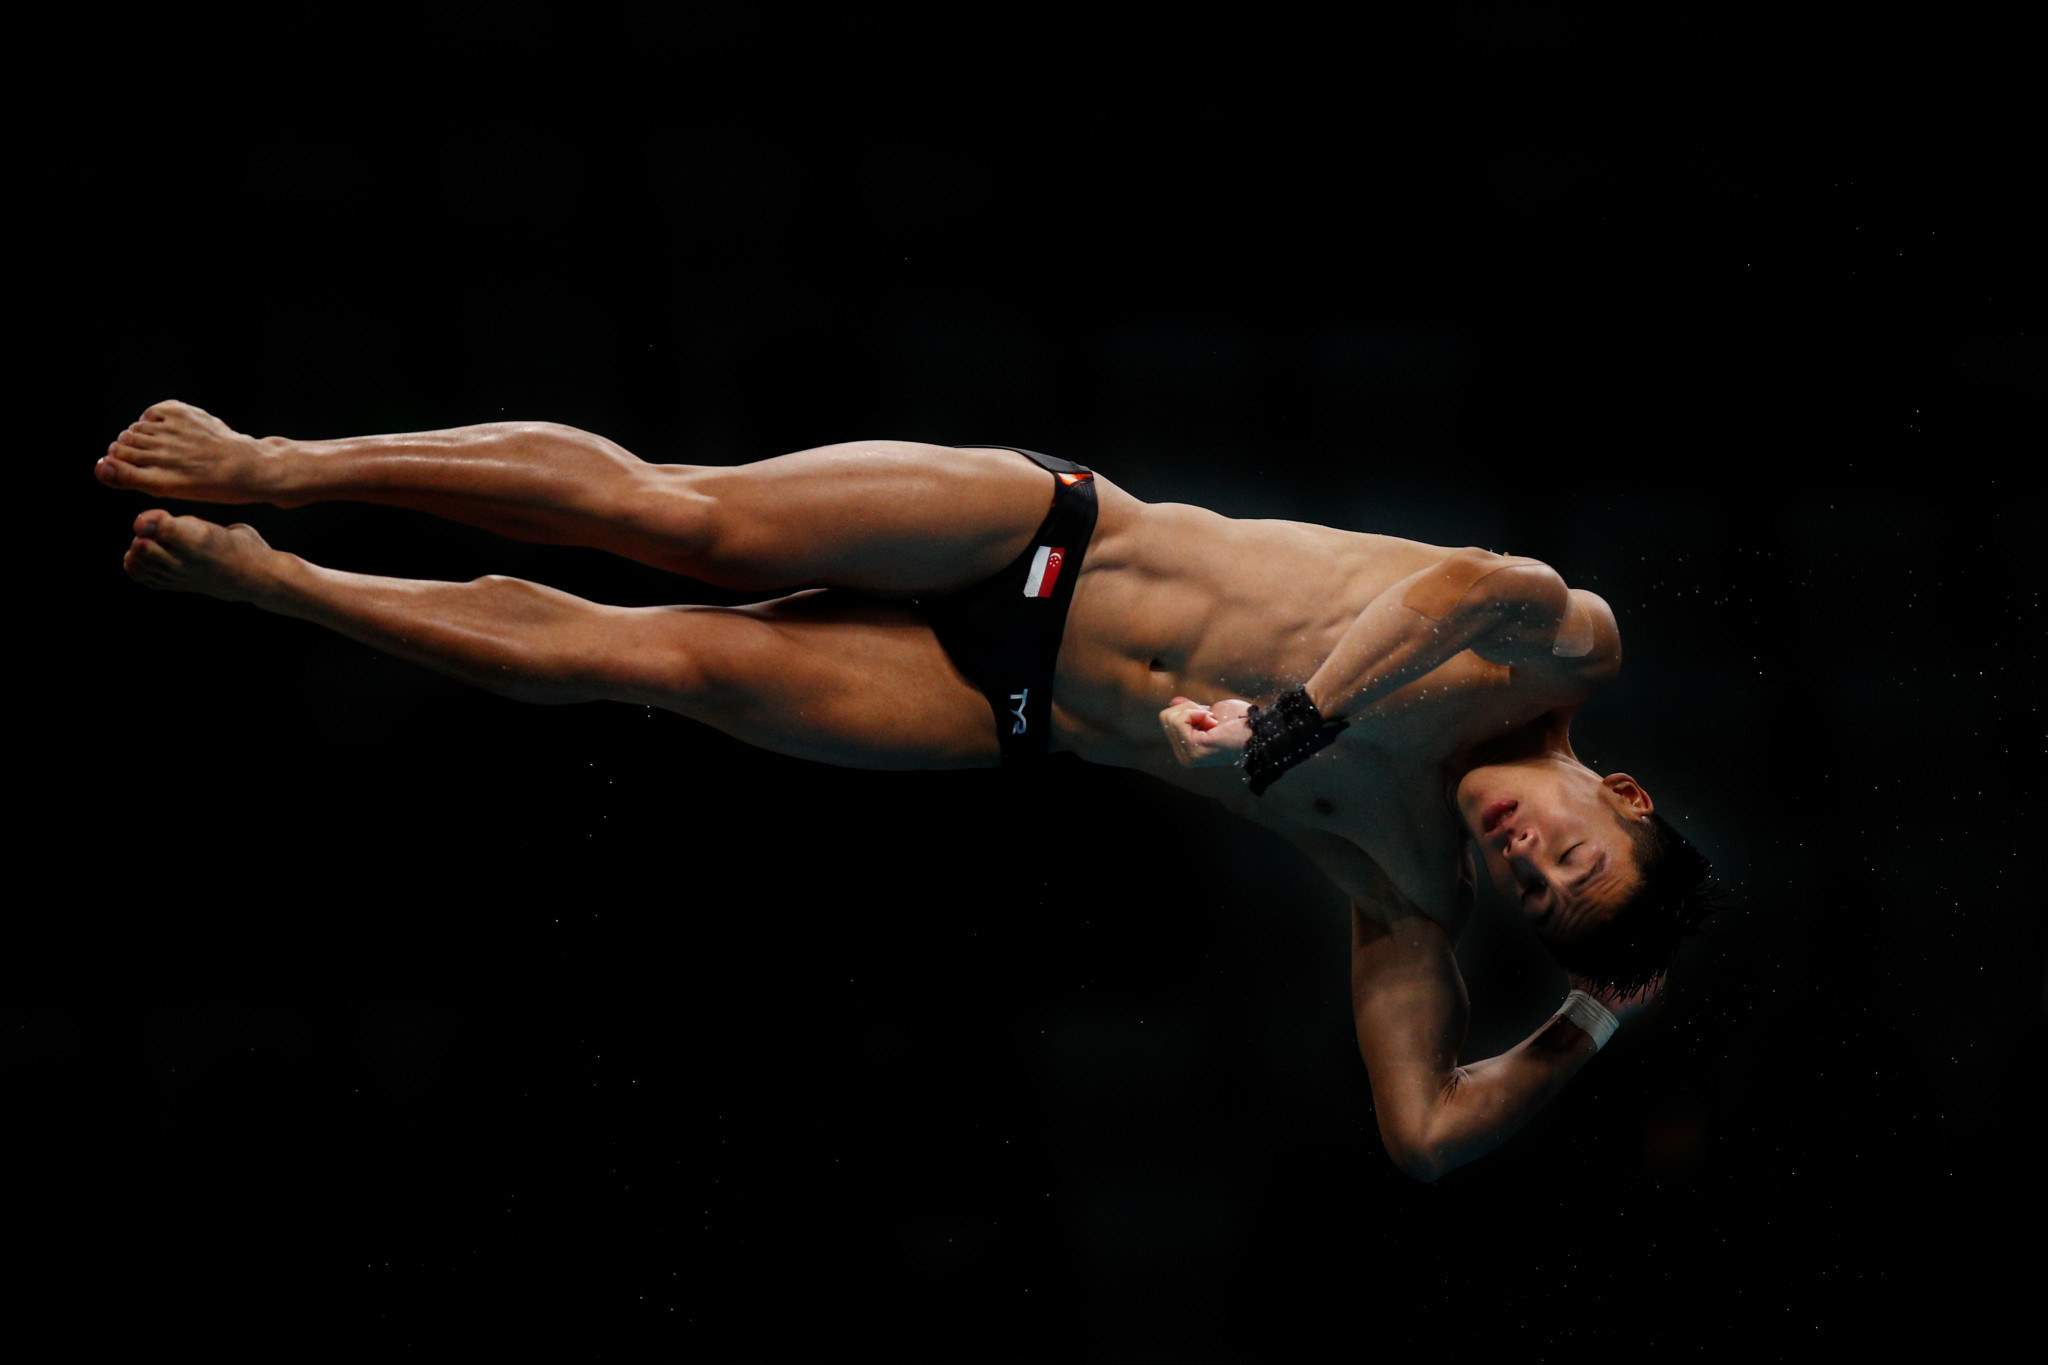 Singapore's Jonathan Chan couldn't challenge the Chinese or Malaysian divers for the gold but left Kuala Lumpur with bronze ©Getty Images